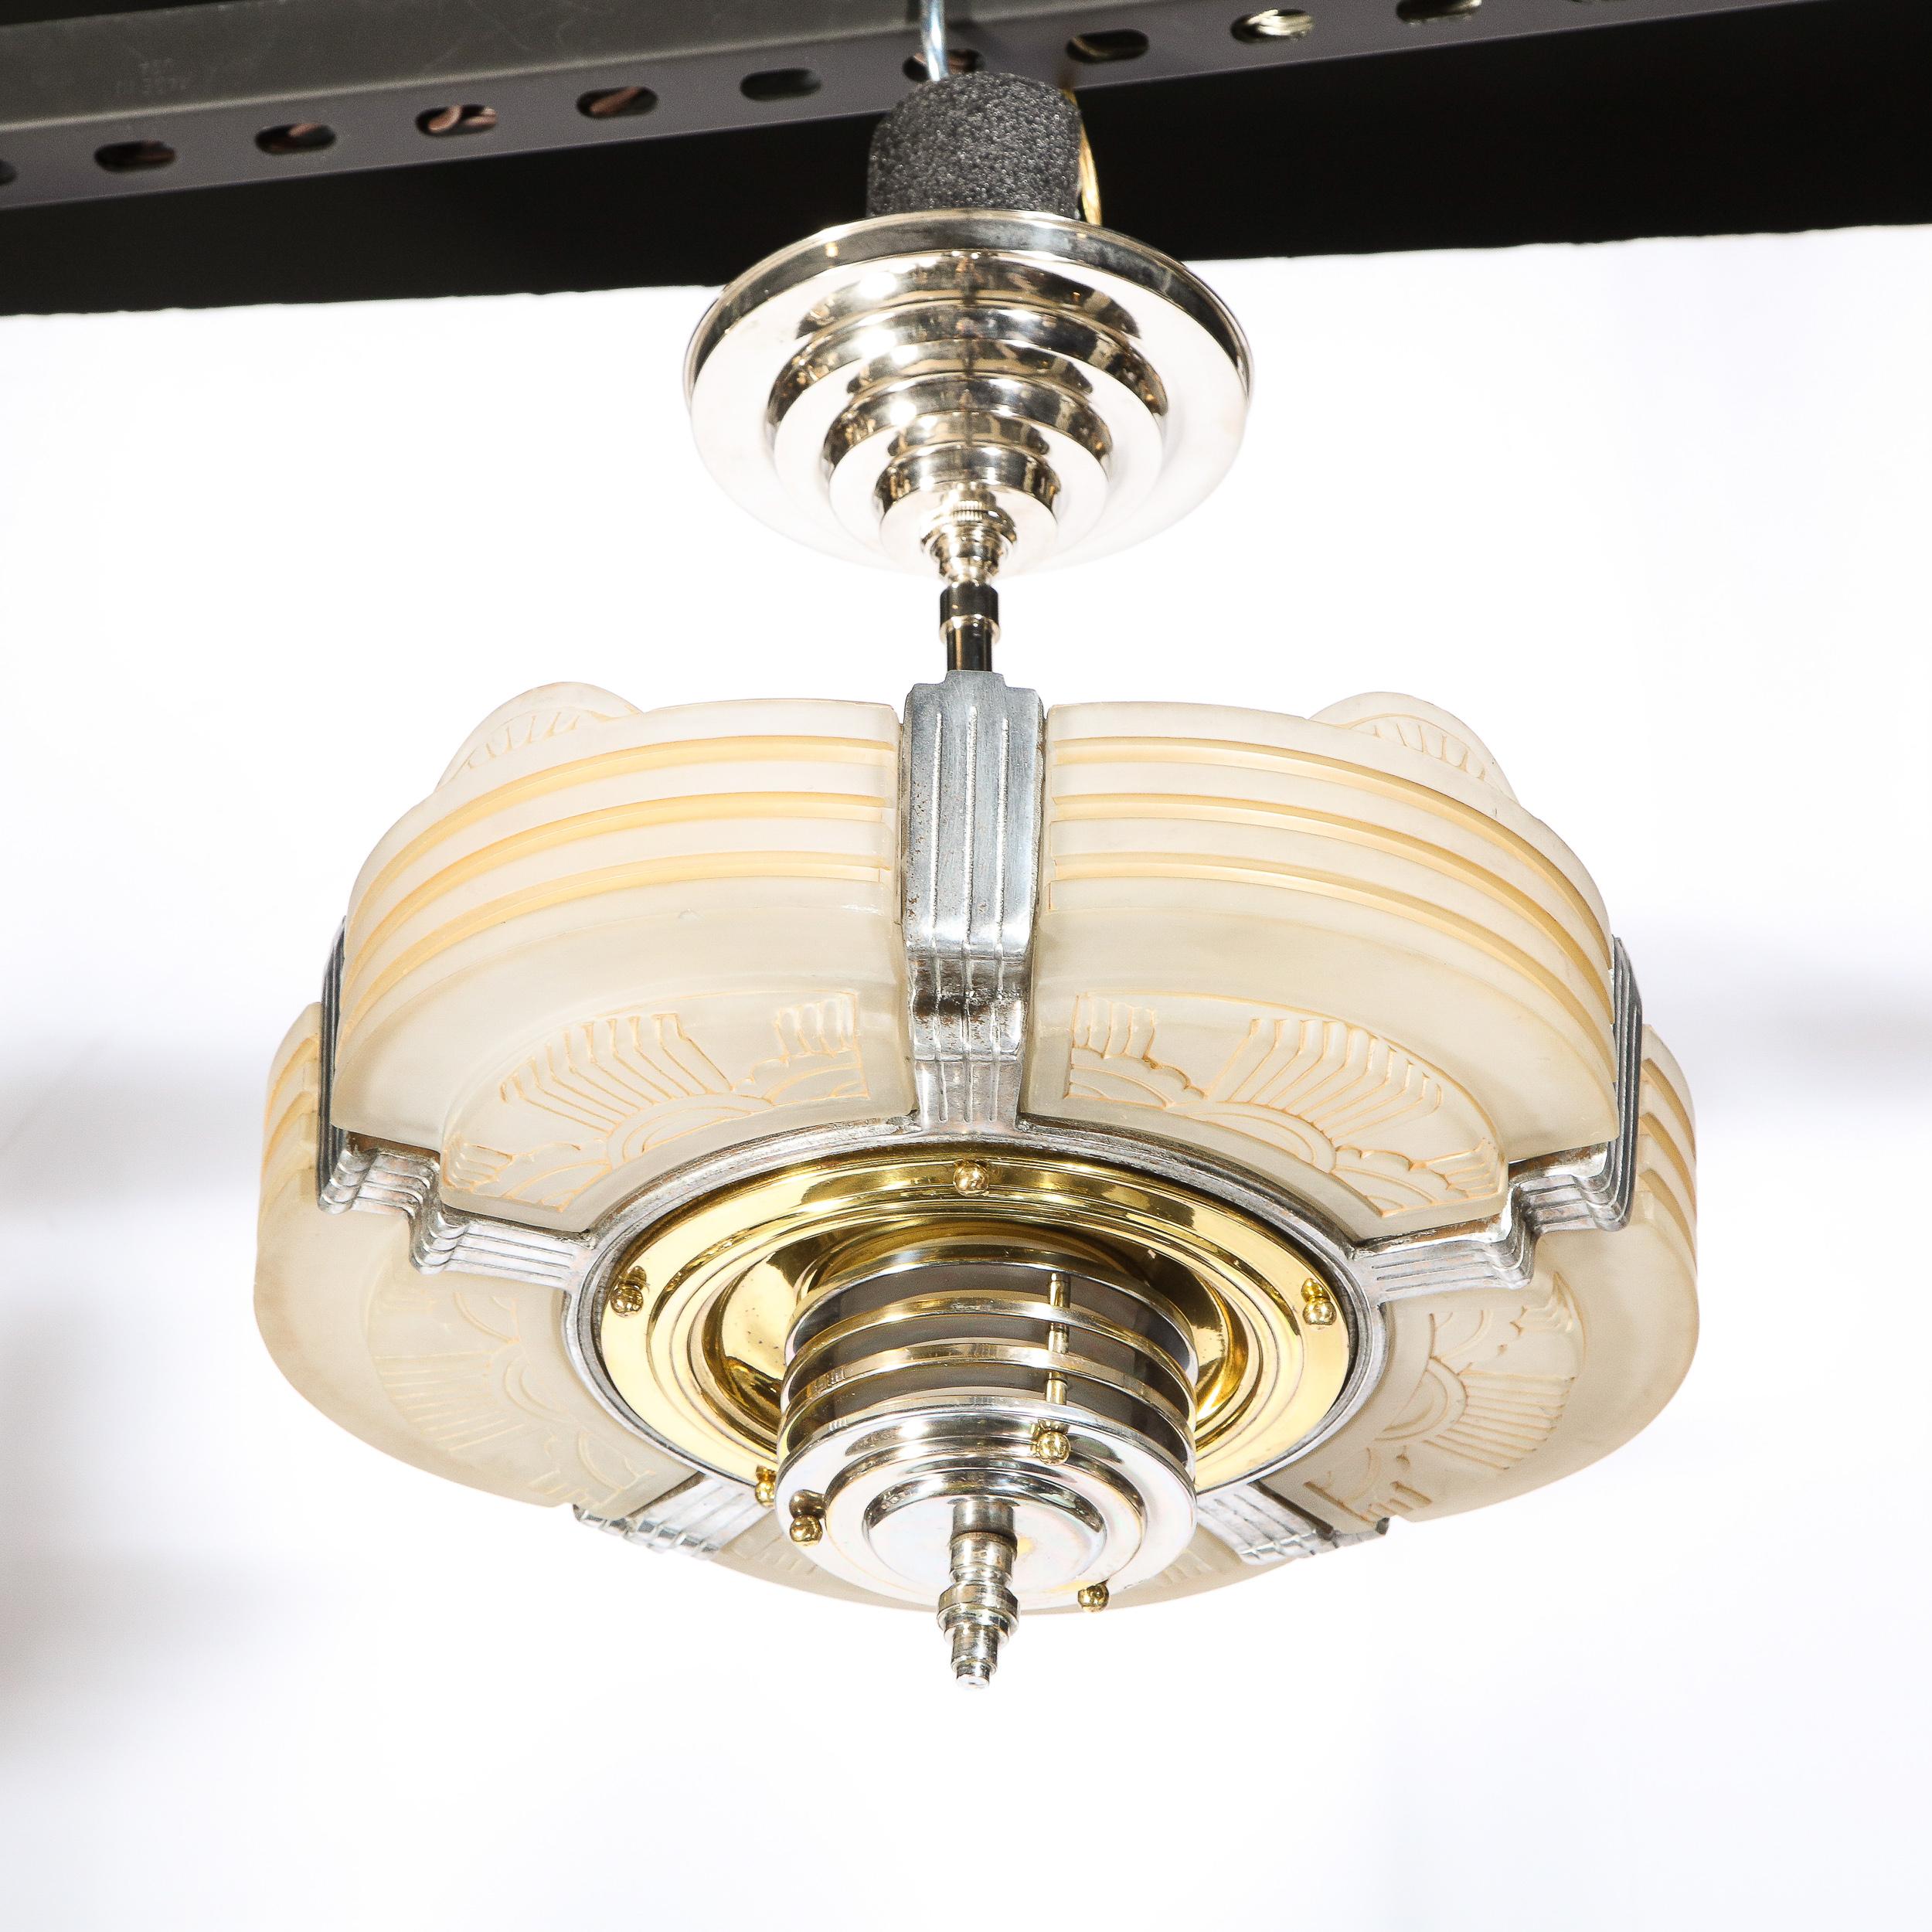 This elegant Art Deco Machine Age chandelier was realized in the United States circa 1935. It features five rose hued glass panels with channeled sides and etched sun/cloud motifs on the bottom of each. The glass secured with streamlined channeled